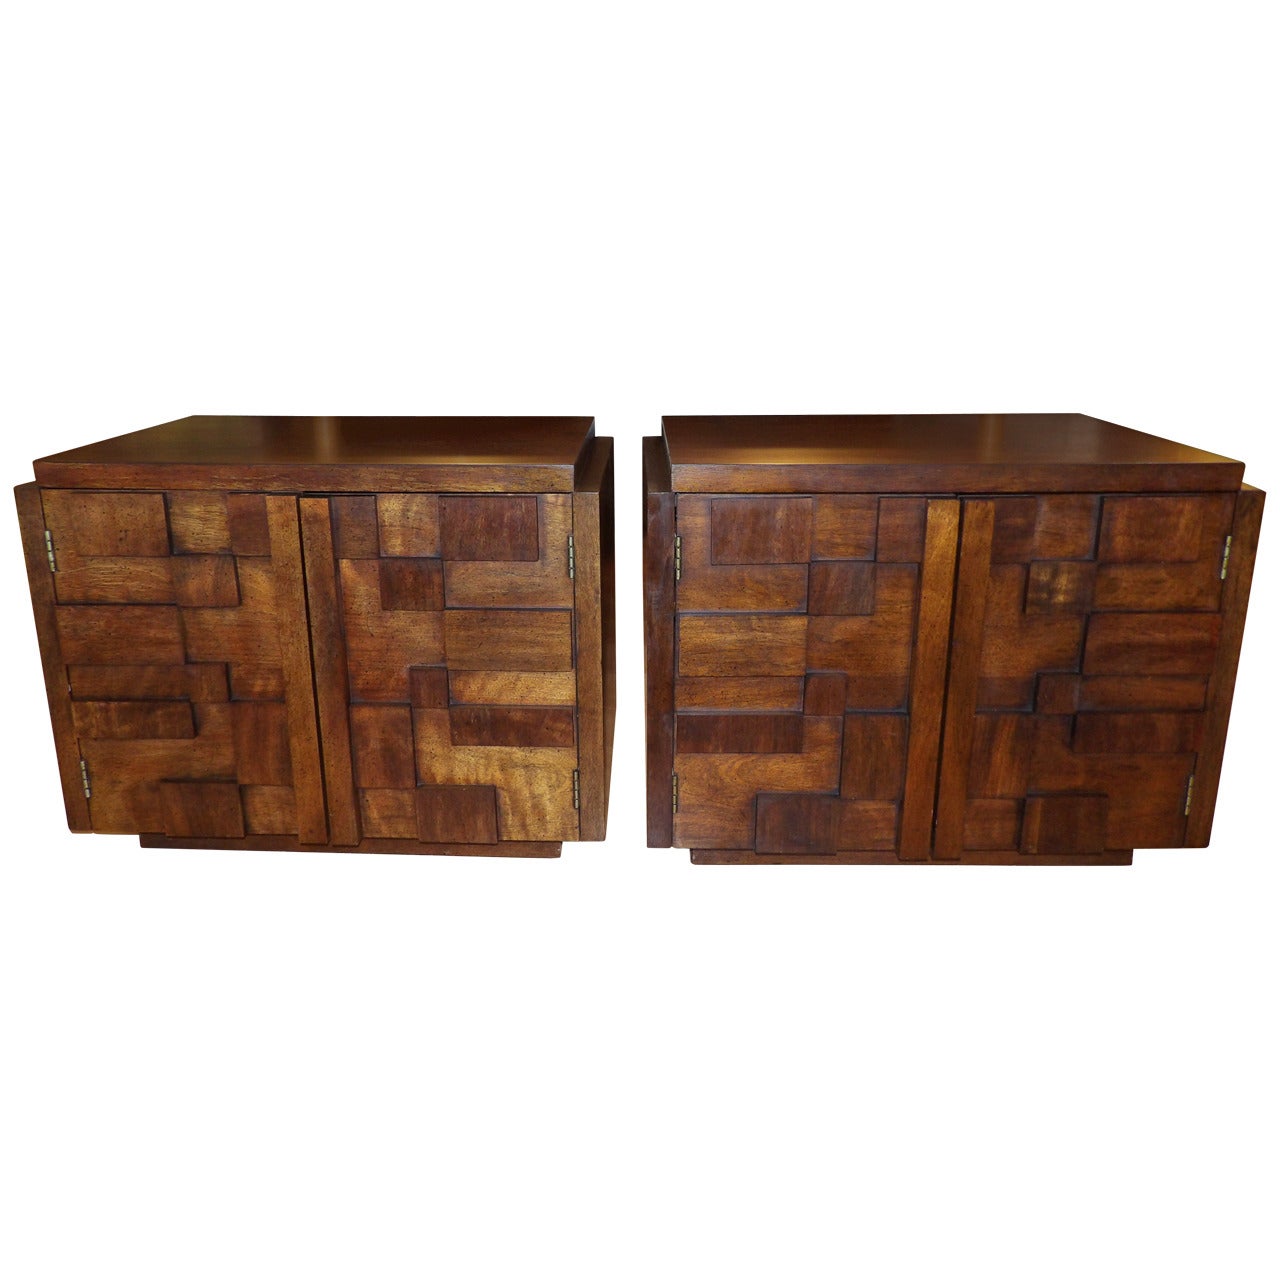 "Mosaic" Cubist Walnut Tile Nightstands or End Tables by Lane Furniture